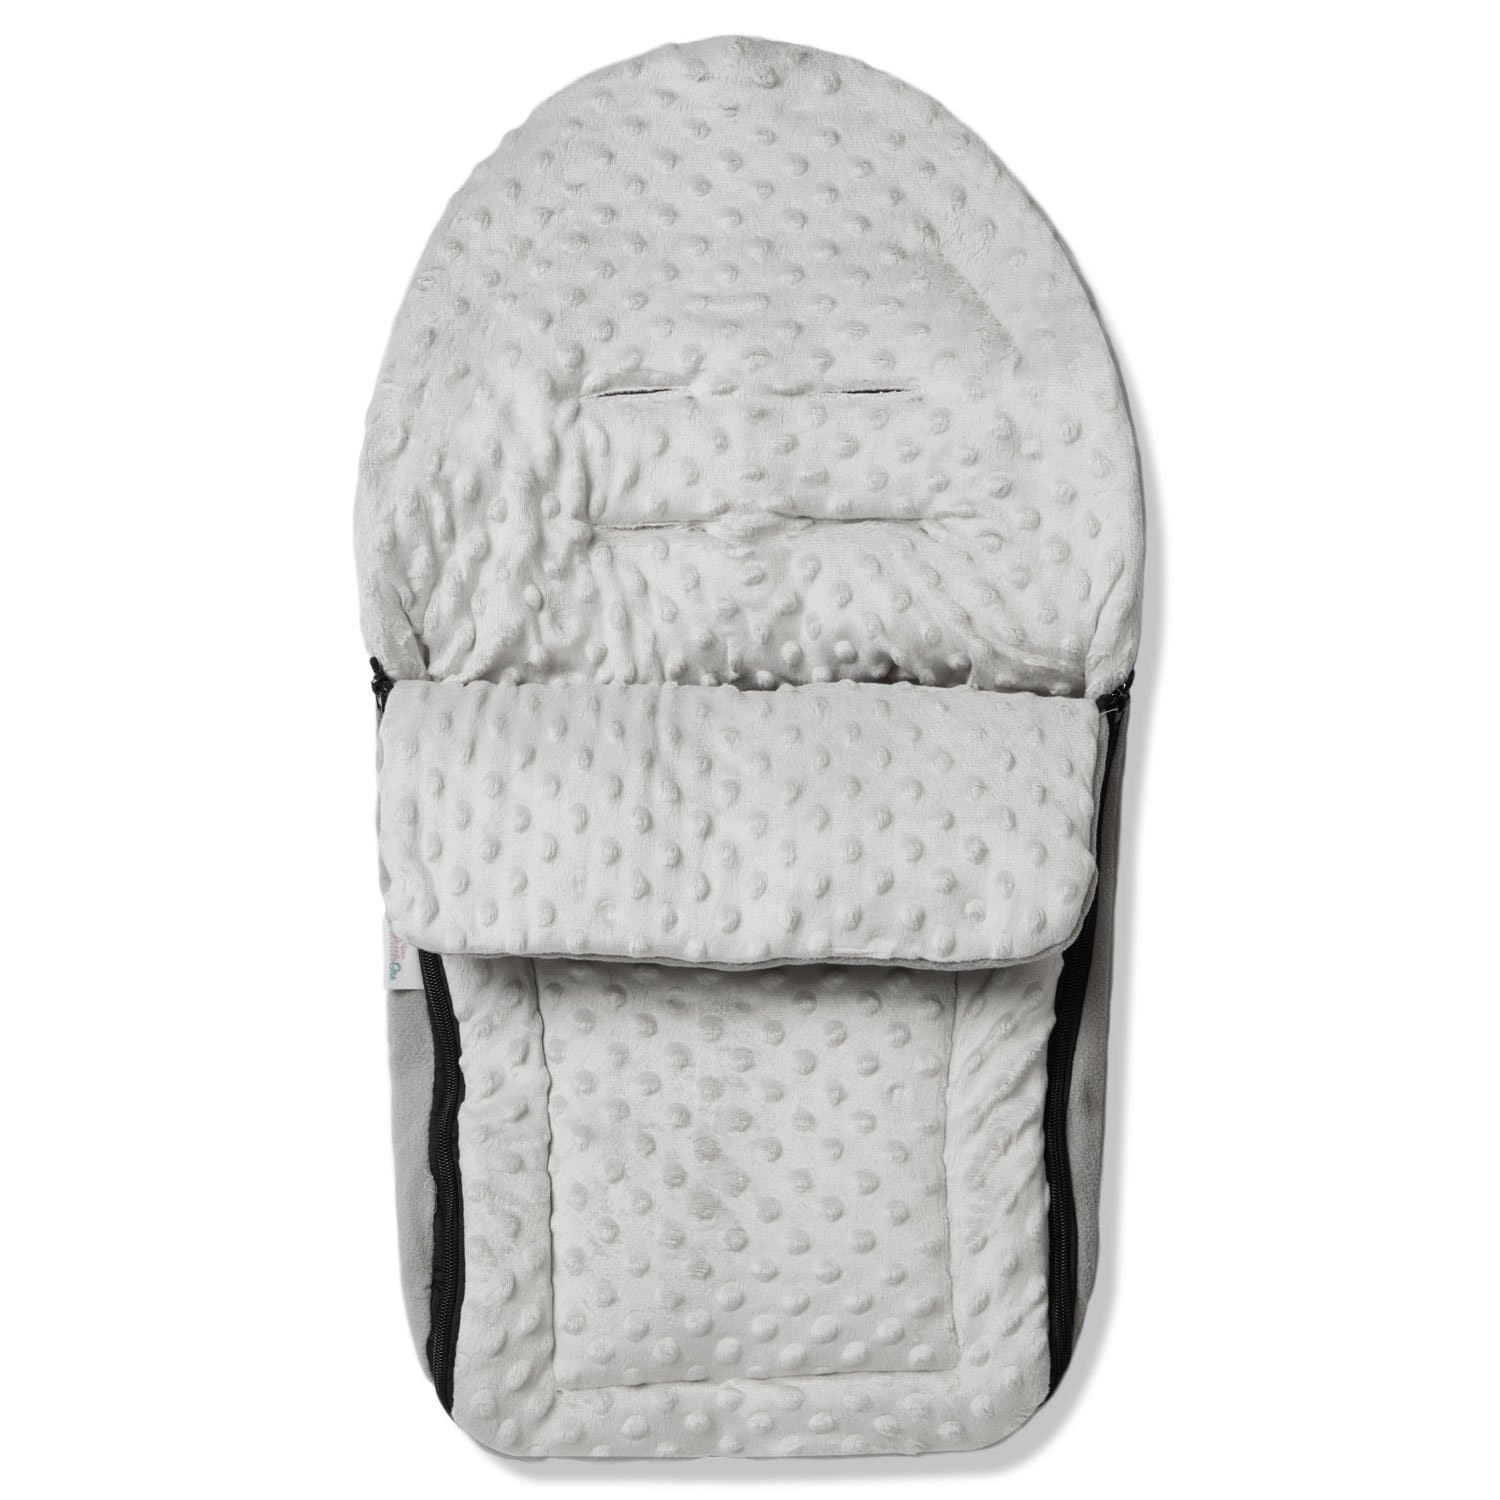 Dimple Car Seat Footmuff / Cosy Toes Compatible with Phil & Teds - Grey / Fits All Models | For Your Little One